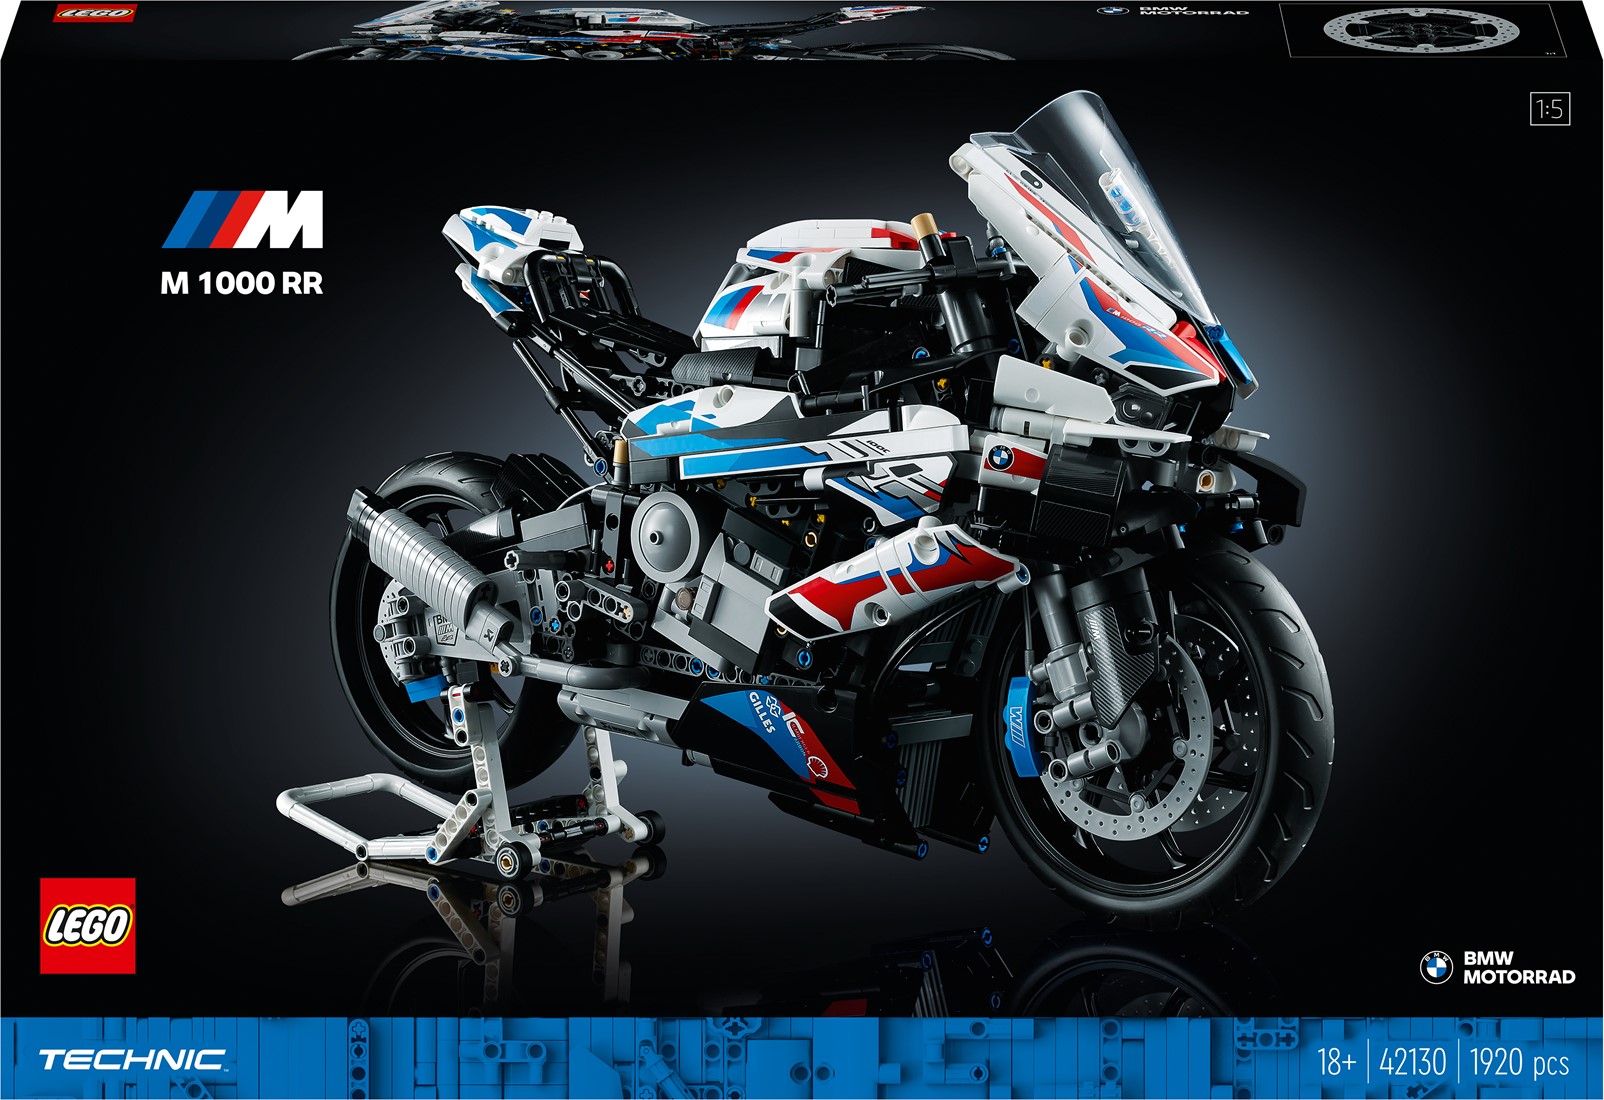 LEGO Technic BMW M 1000 RR Motorcycle buildable model kit 42130